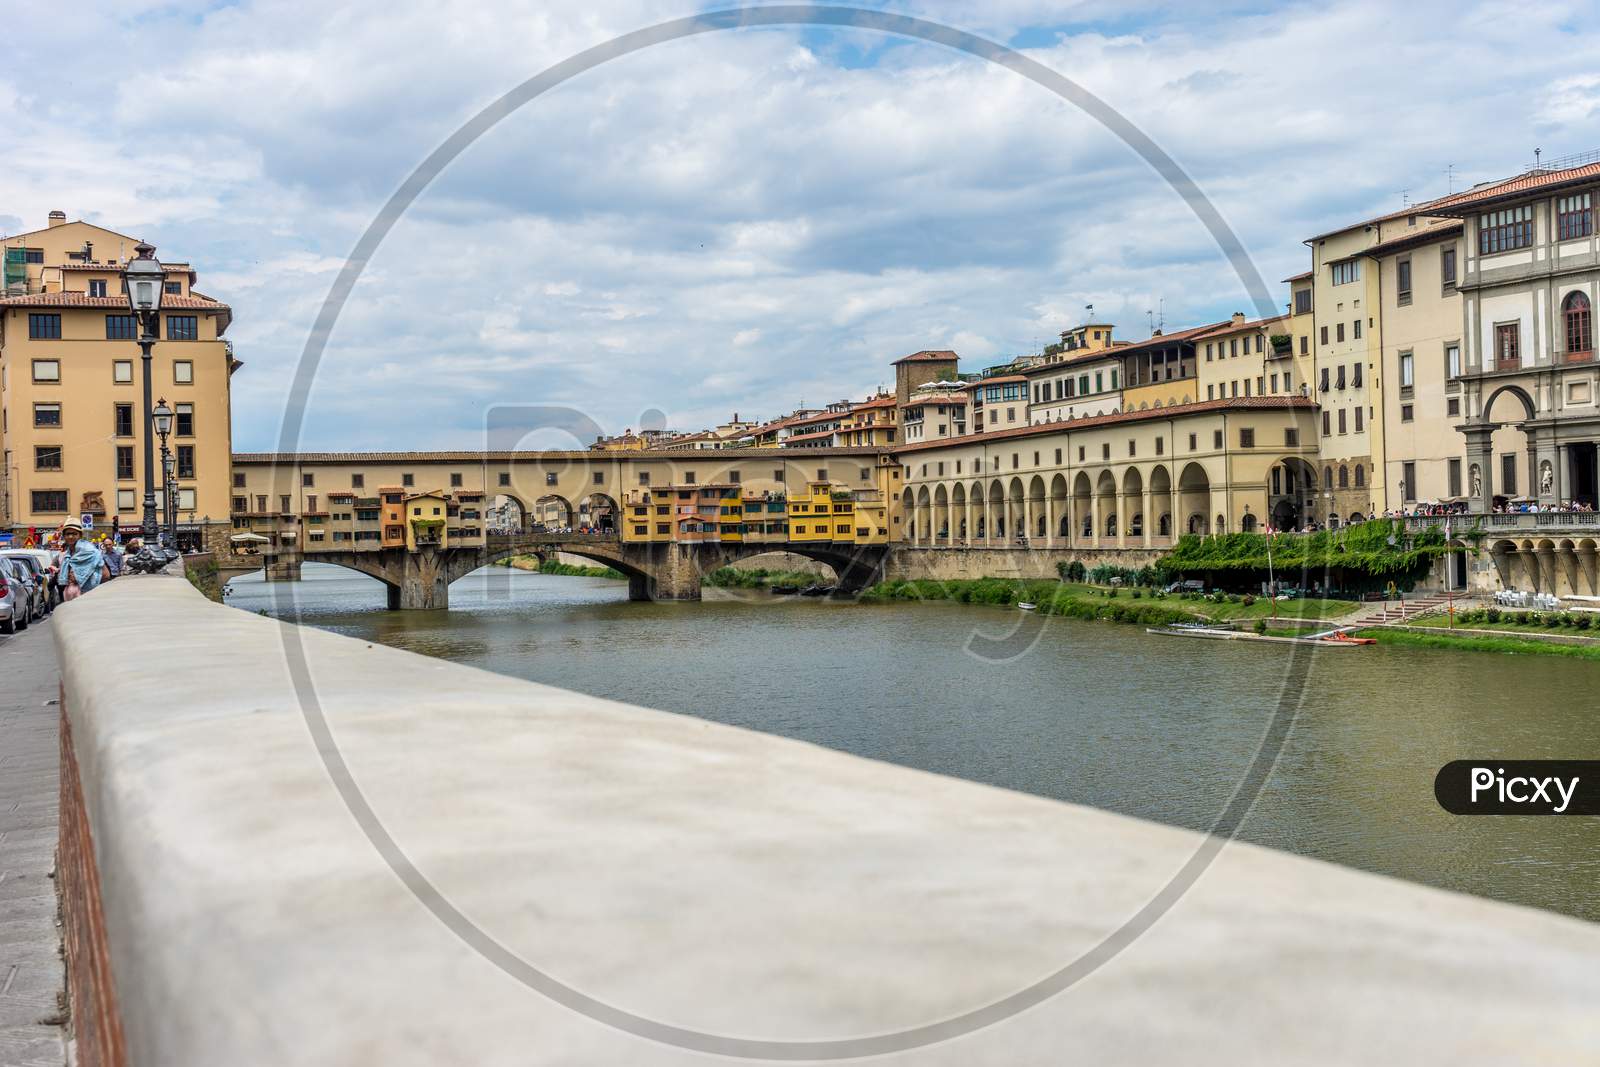 Florence, Italy - 25 June 2018: The Ponte Vecchio Over The Arno River In Florence, Italy